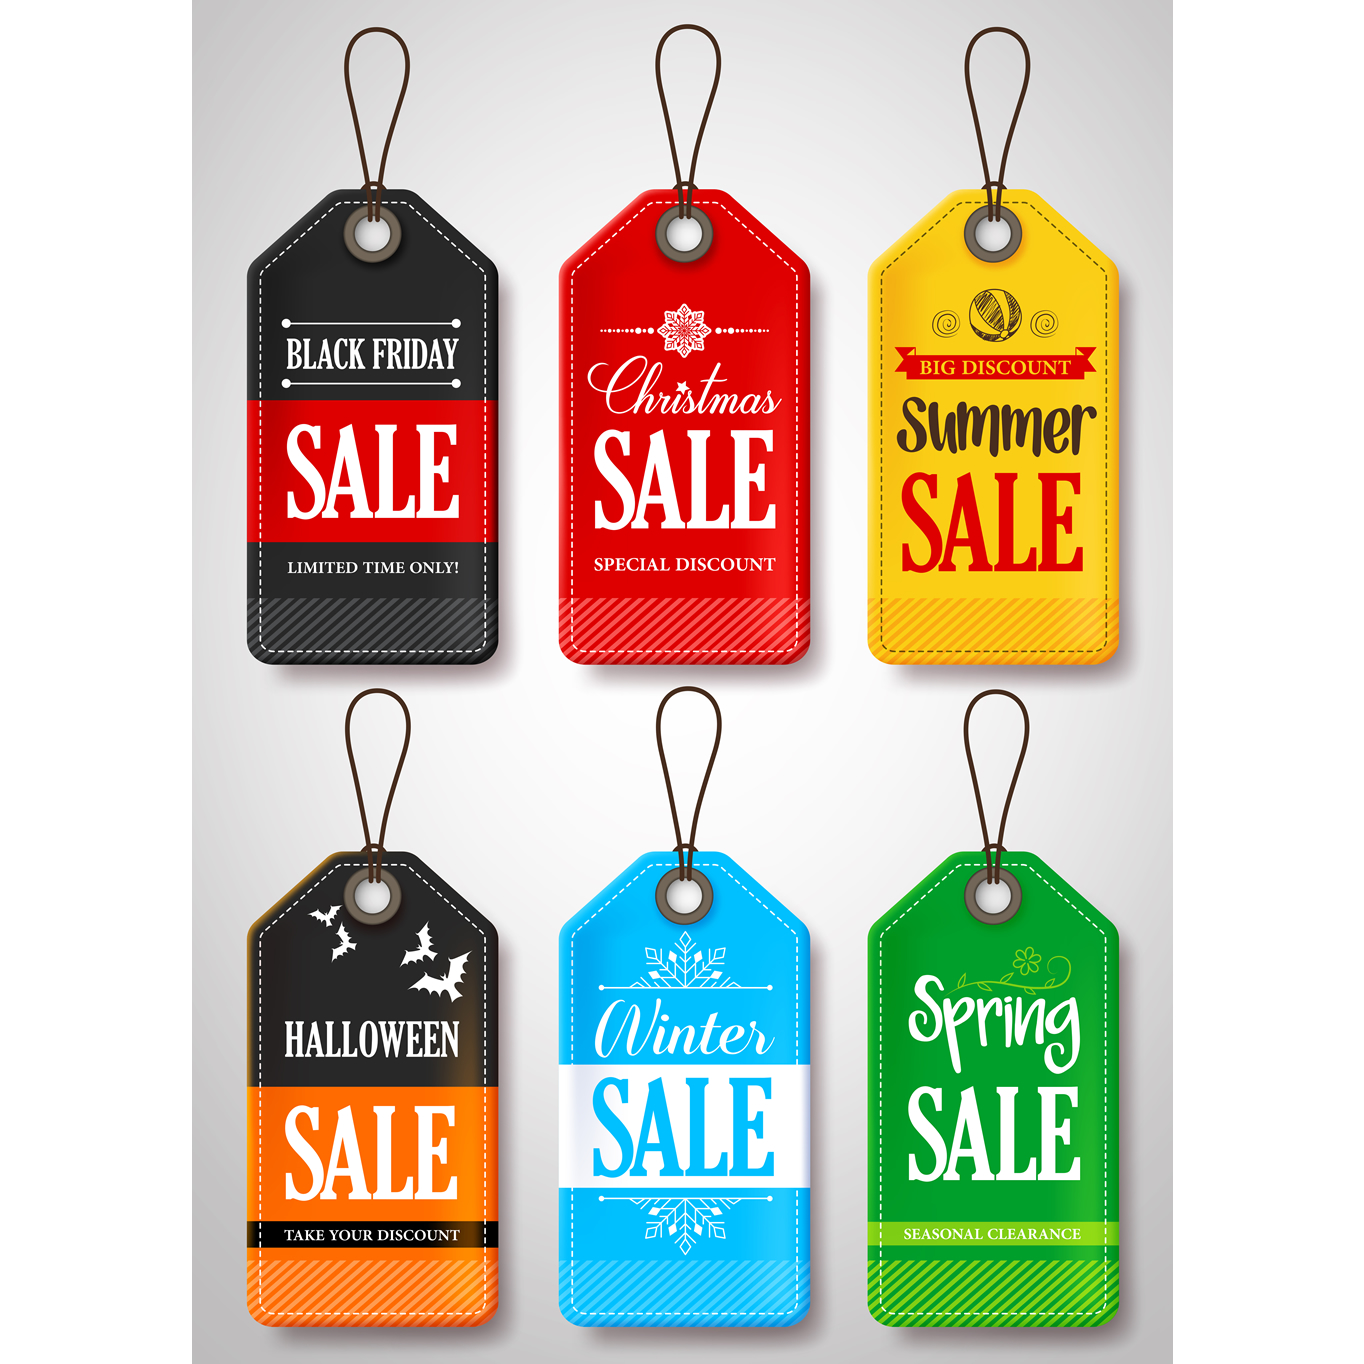 Different sales tags for Christmas, Winter, Summer, Spring, Halloween, Black Friday